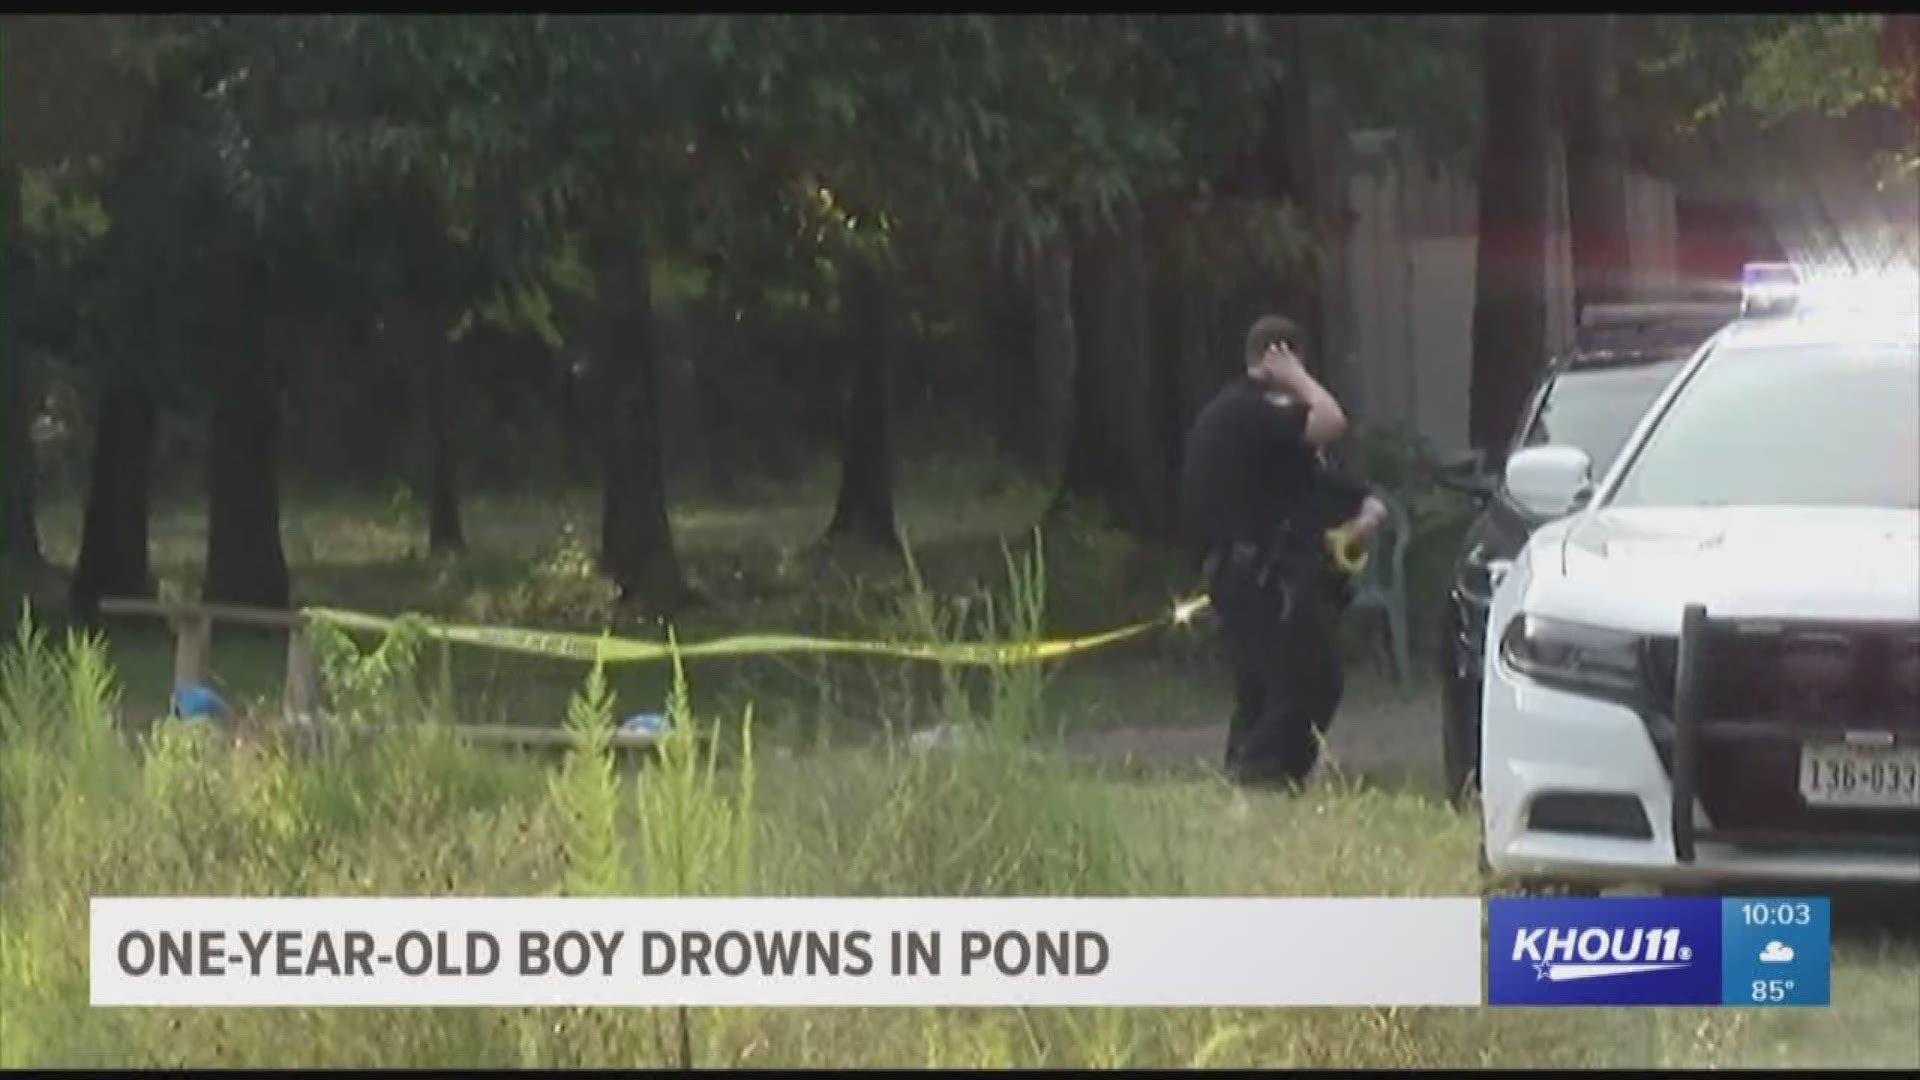 A 1-year-old boy drowned in a pond just outside his home on Timber Switch Road near Cleveland. Detectives say the family was going to celebrate the boy's birthday Saturday. 